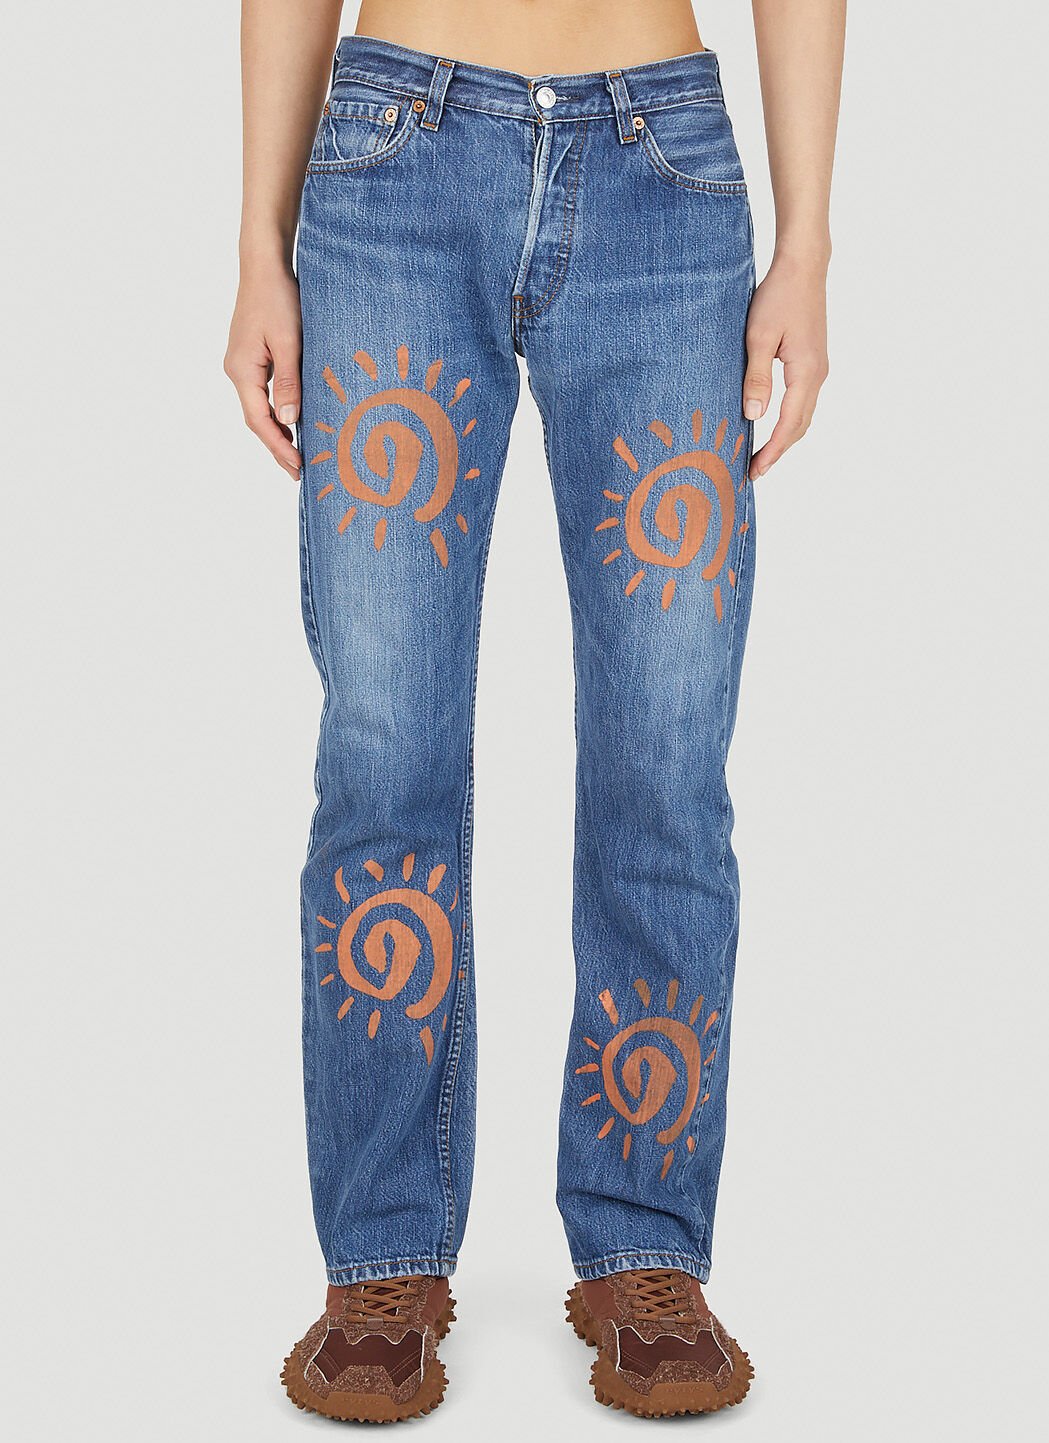 P.A.M. Energy Sun Second Life Jeans White pam0357002